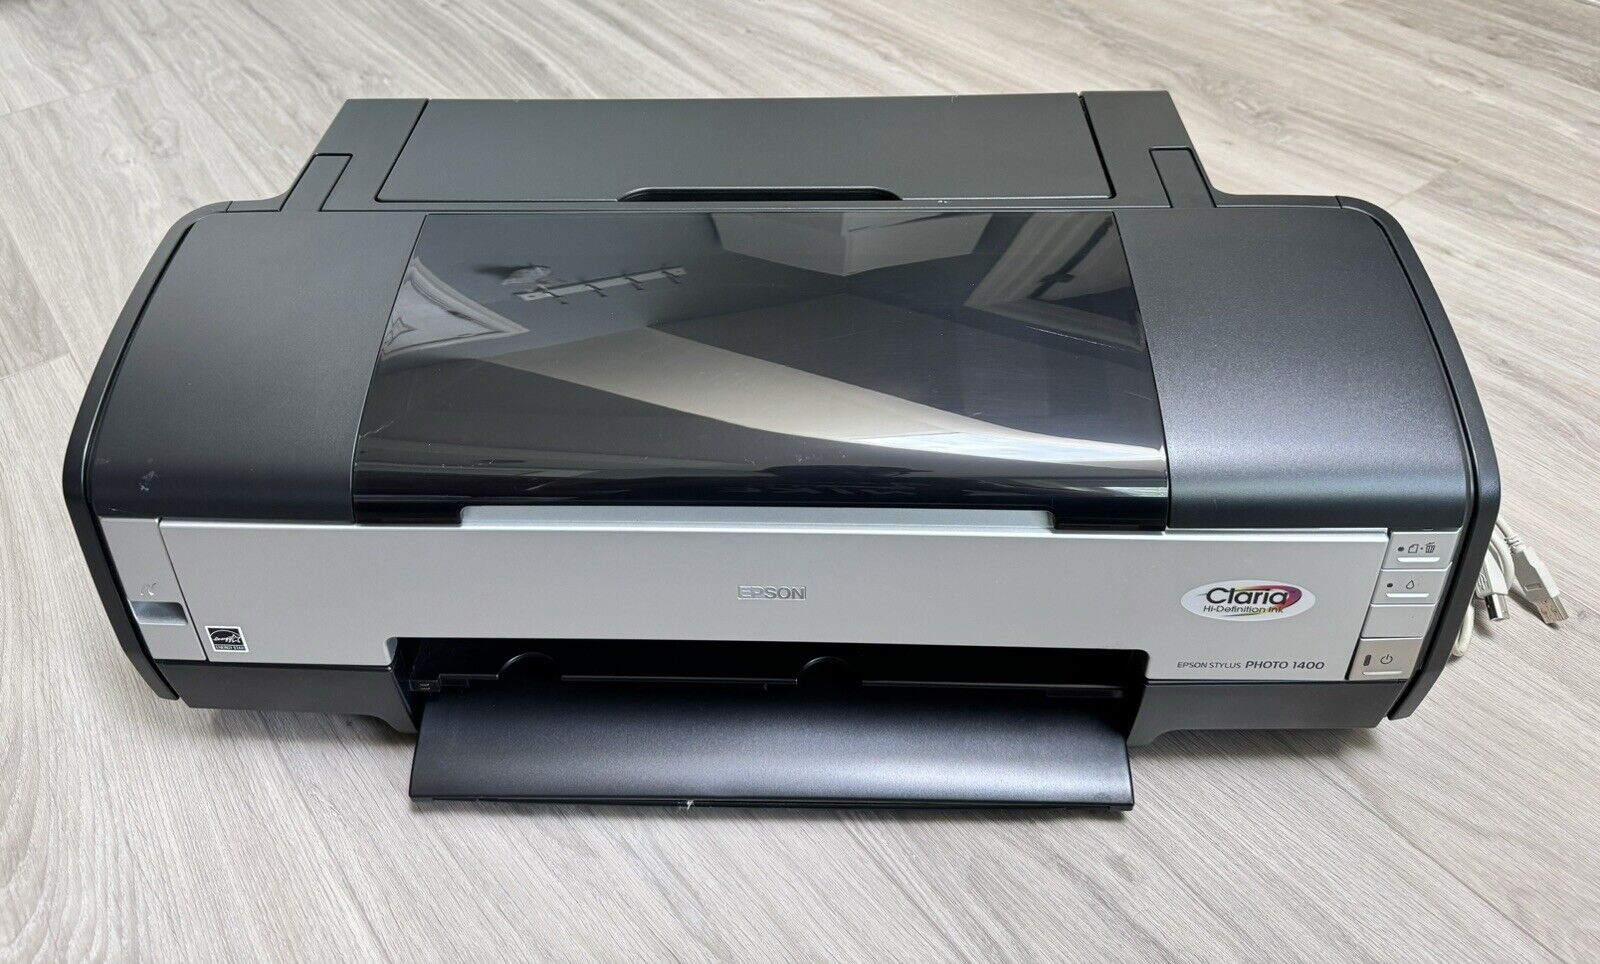 Tested Epson Stylus Photo 1400 Color Inkjet Printer, Works Great, Read Descrip.